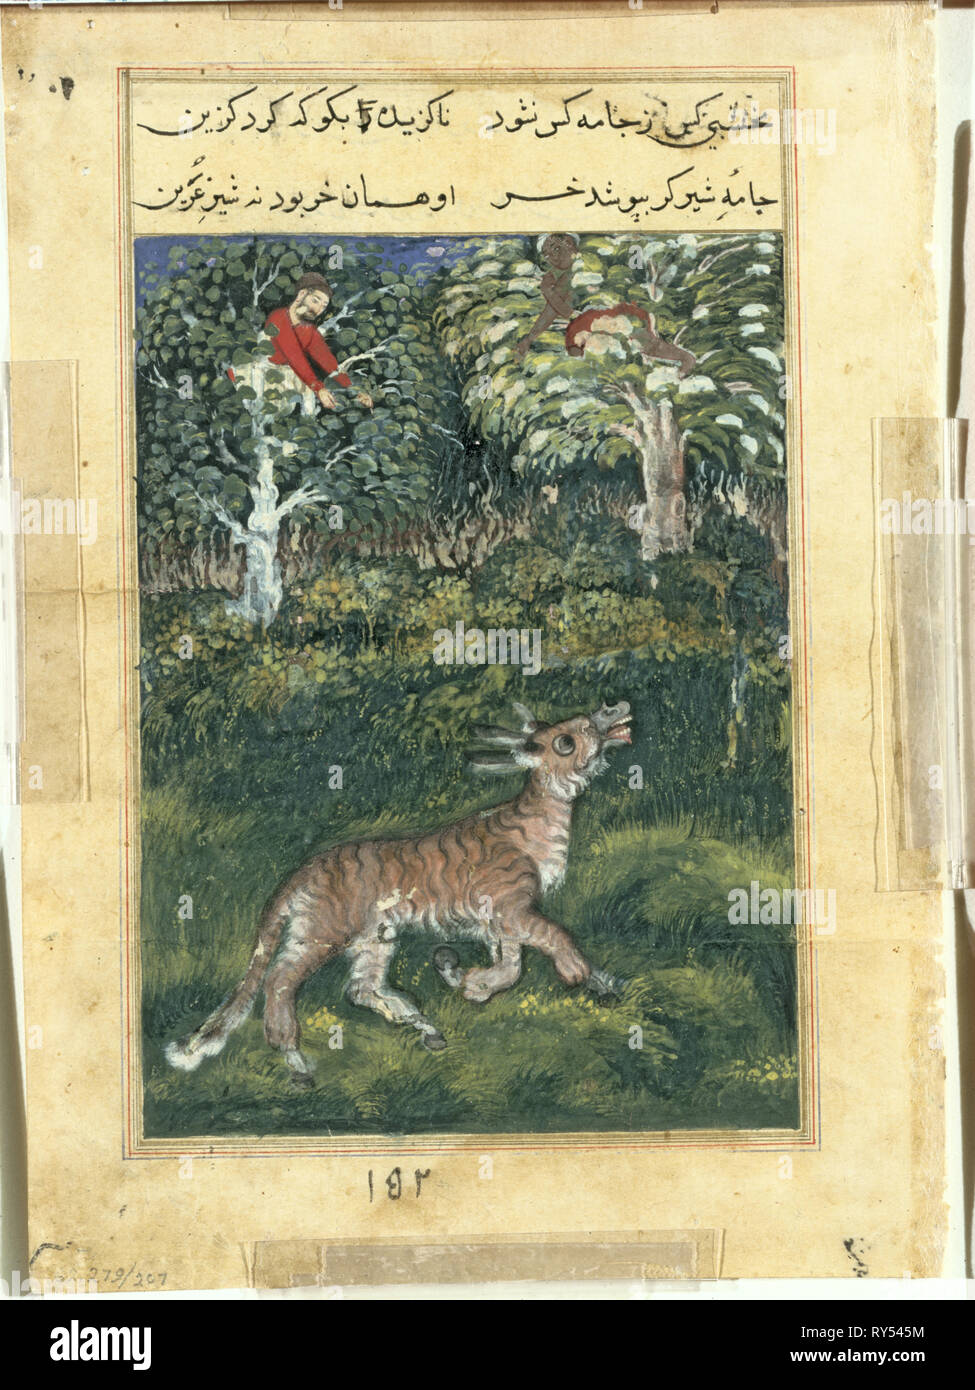 Page from Tales of a Parrot (Tuti-nama): Thirty-first night: The donkey, in a tiger’s skin, reveals his identity by braying aloud, 1558-1560. Attributed to Basavana (Indian, active c. 1560–1600). Opaque watercolor, ink, and gold on paper Stock Photo